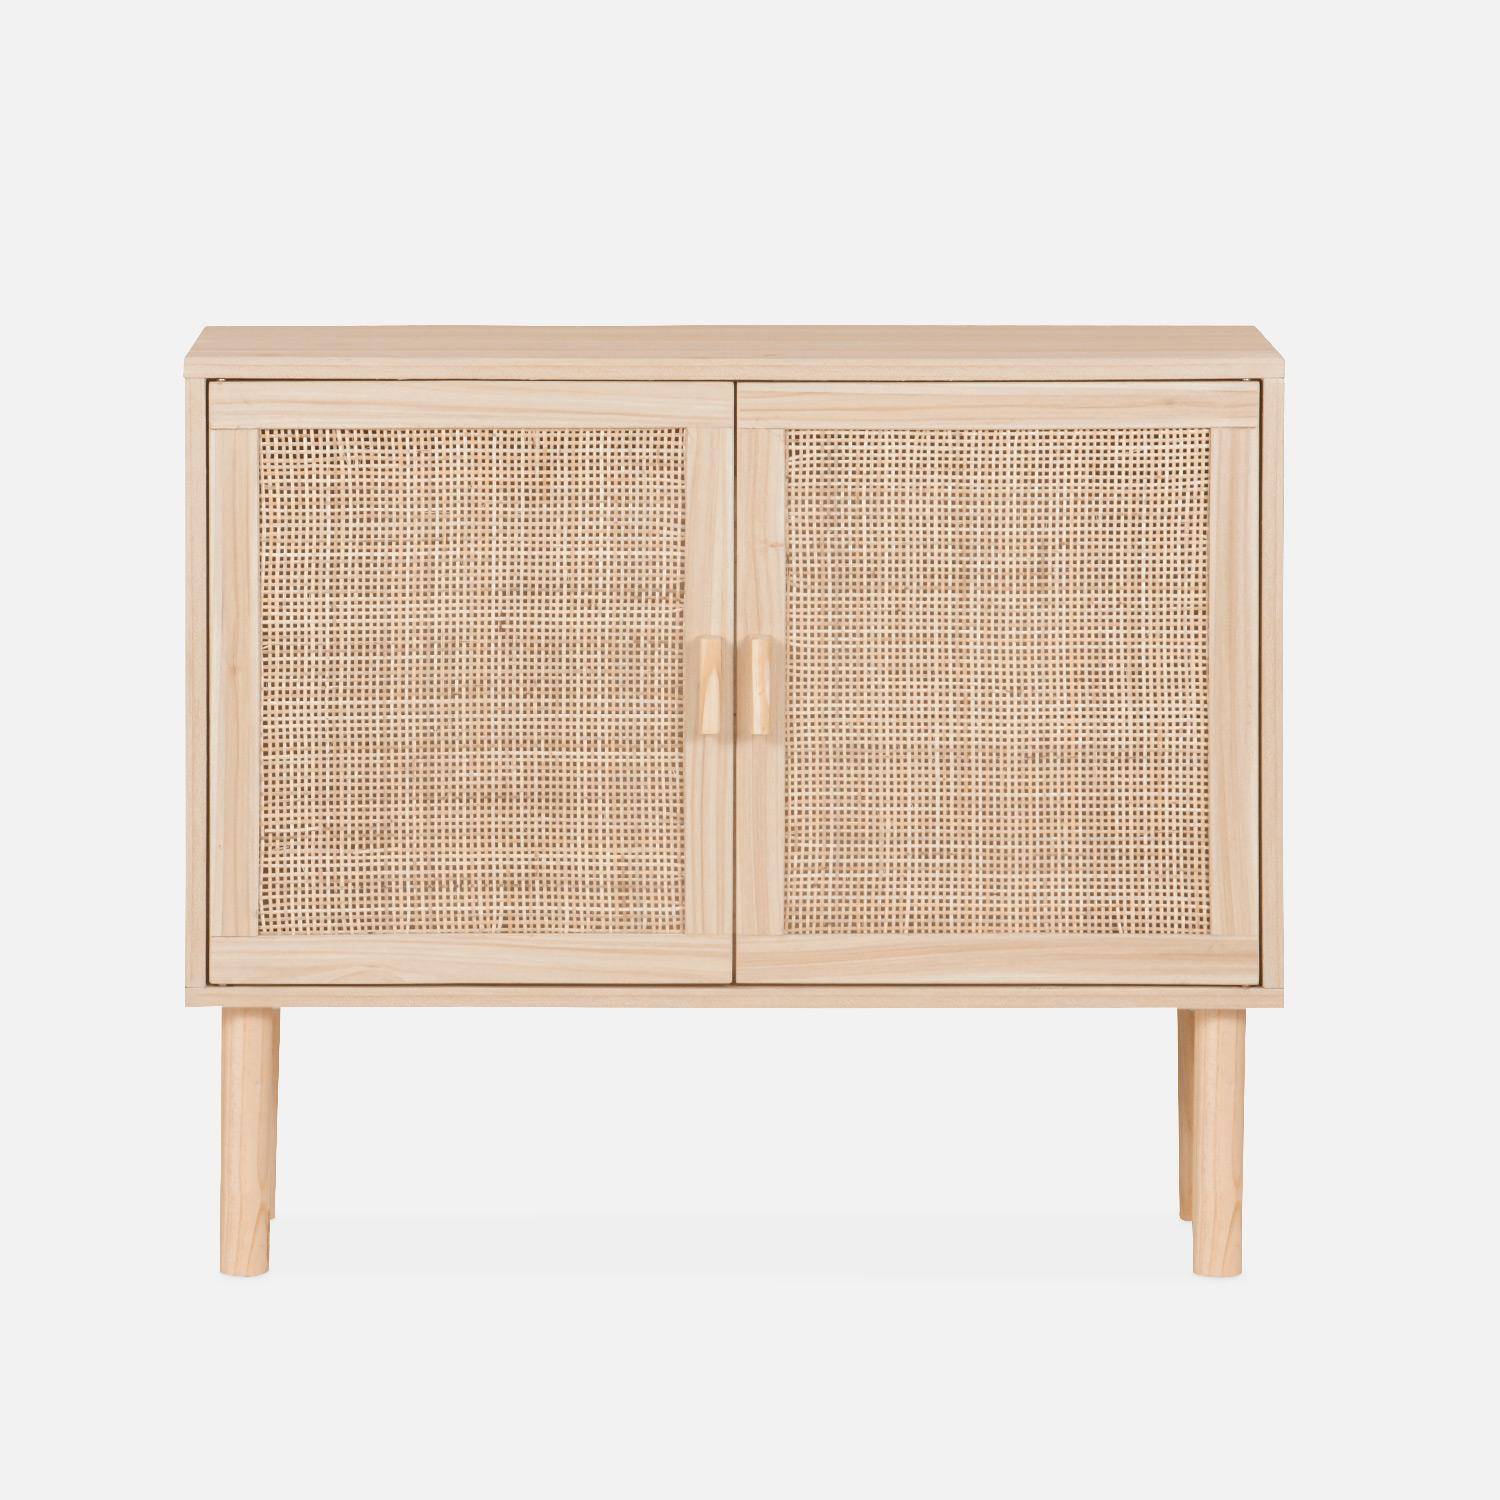 Wood and woven rattan 2-door storage cabinet with shelves, 80x30x68cm, Camargue, Natural,sweeek,Photo4